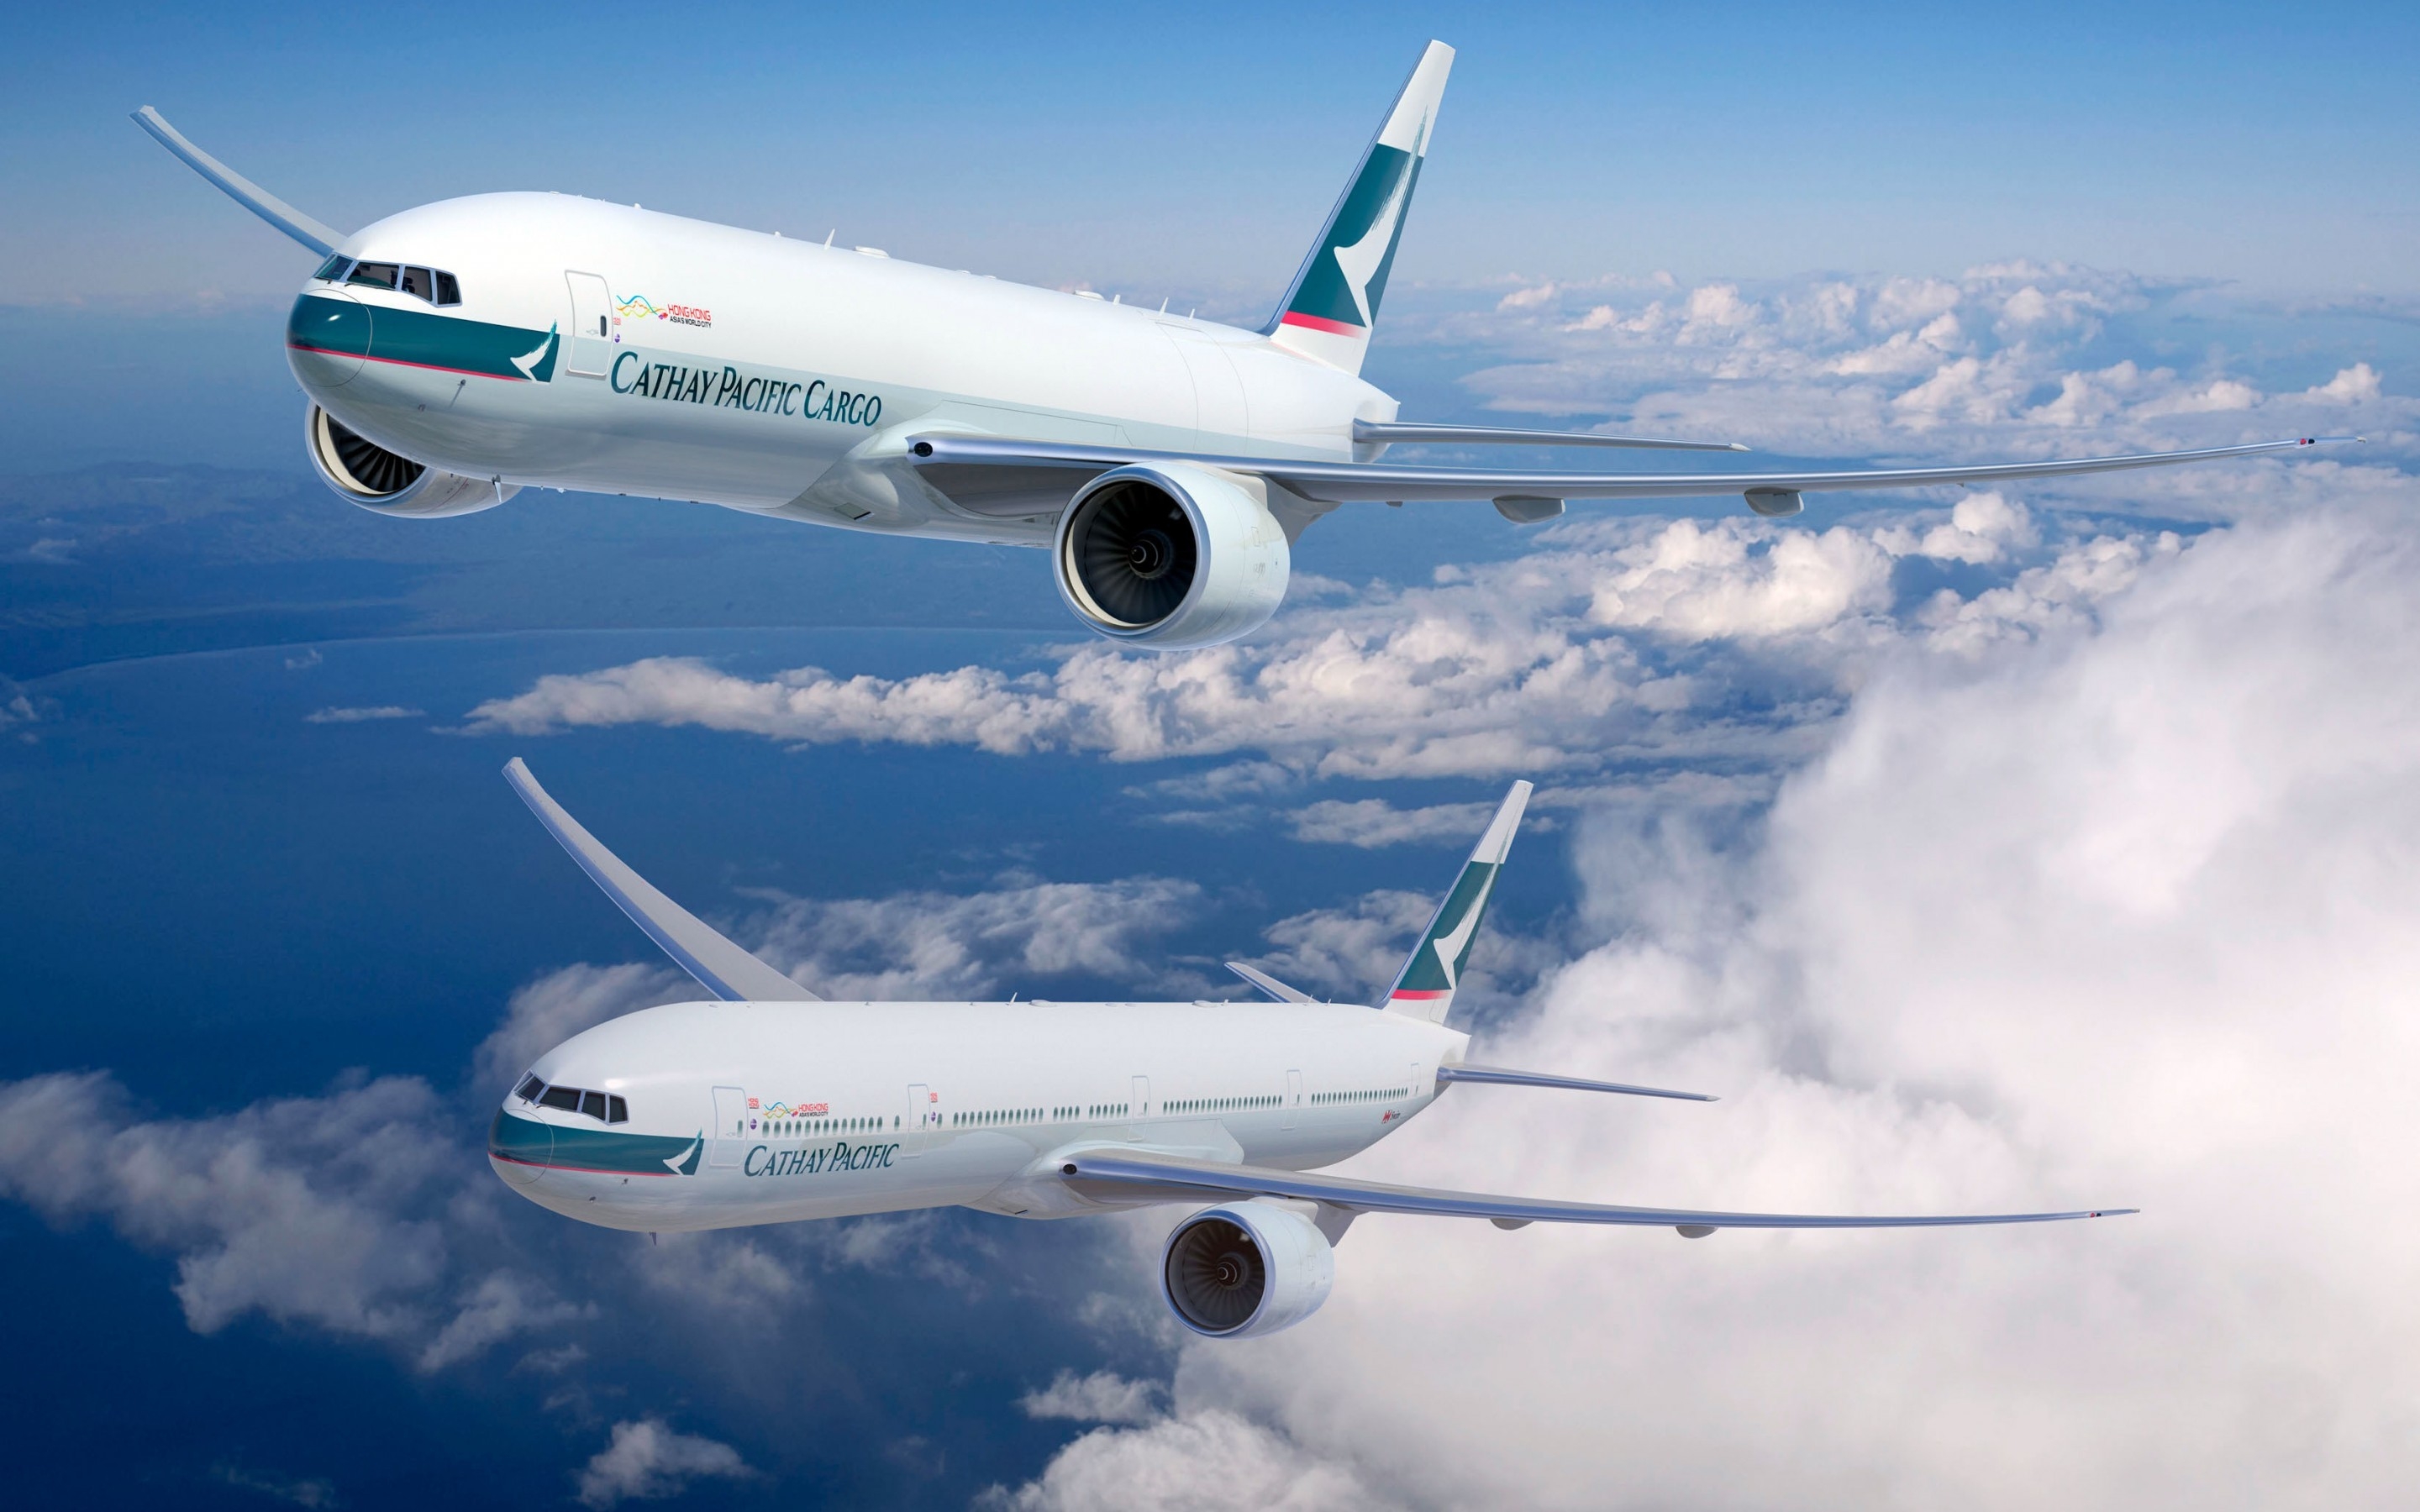 Cathay Pacific Boeing 777 for 2880 x 1800 Retina Display resolution